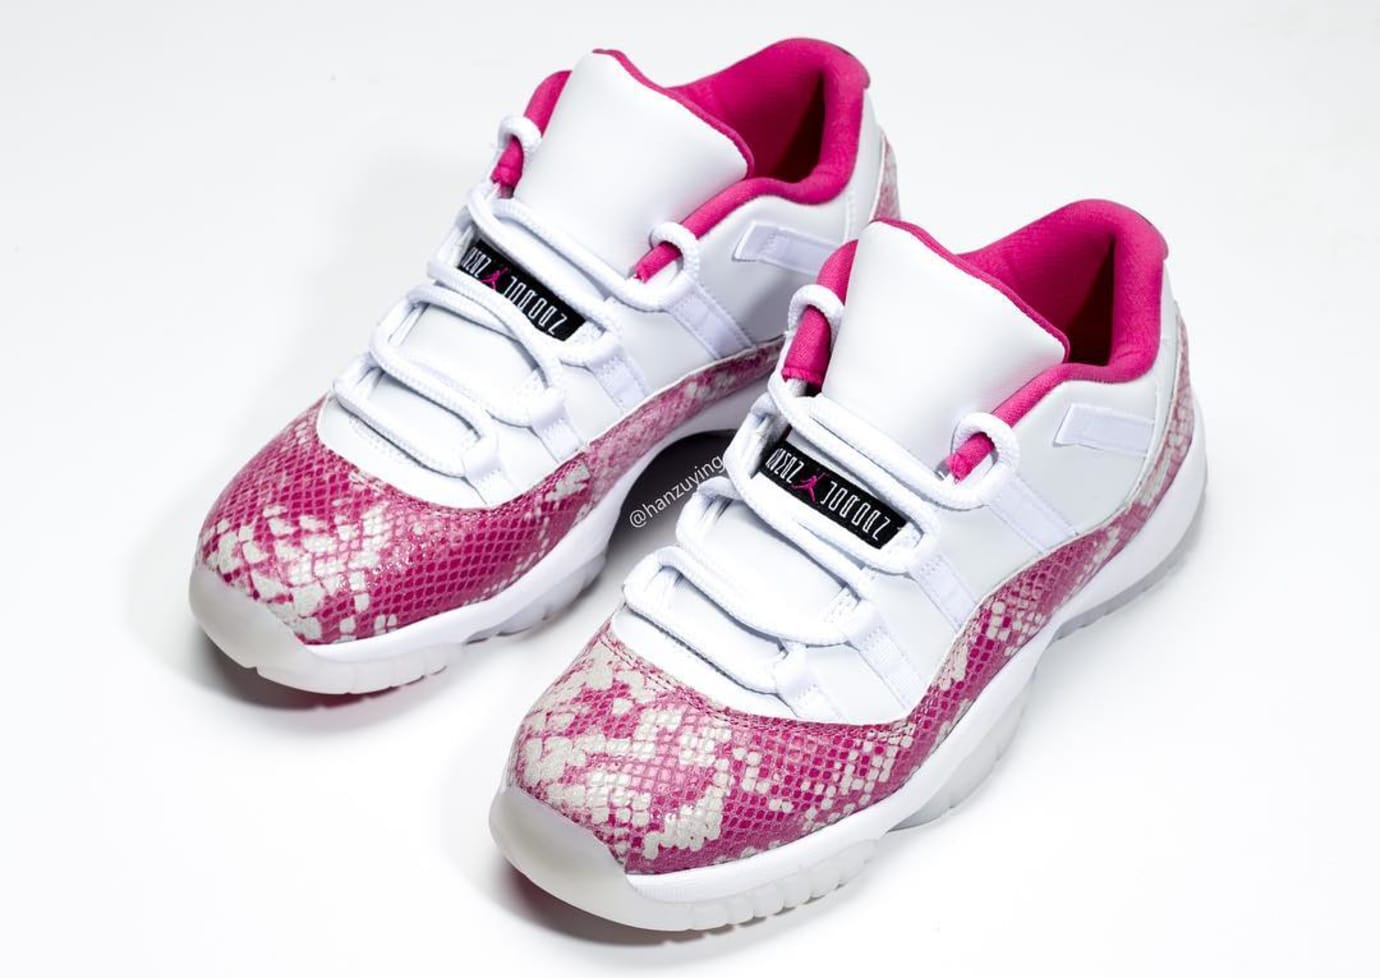 WMNS Air Jordan 11 Low 'Pink Snakeskin' Release Date | Sole Collector